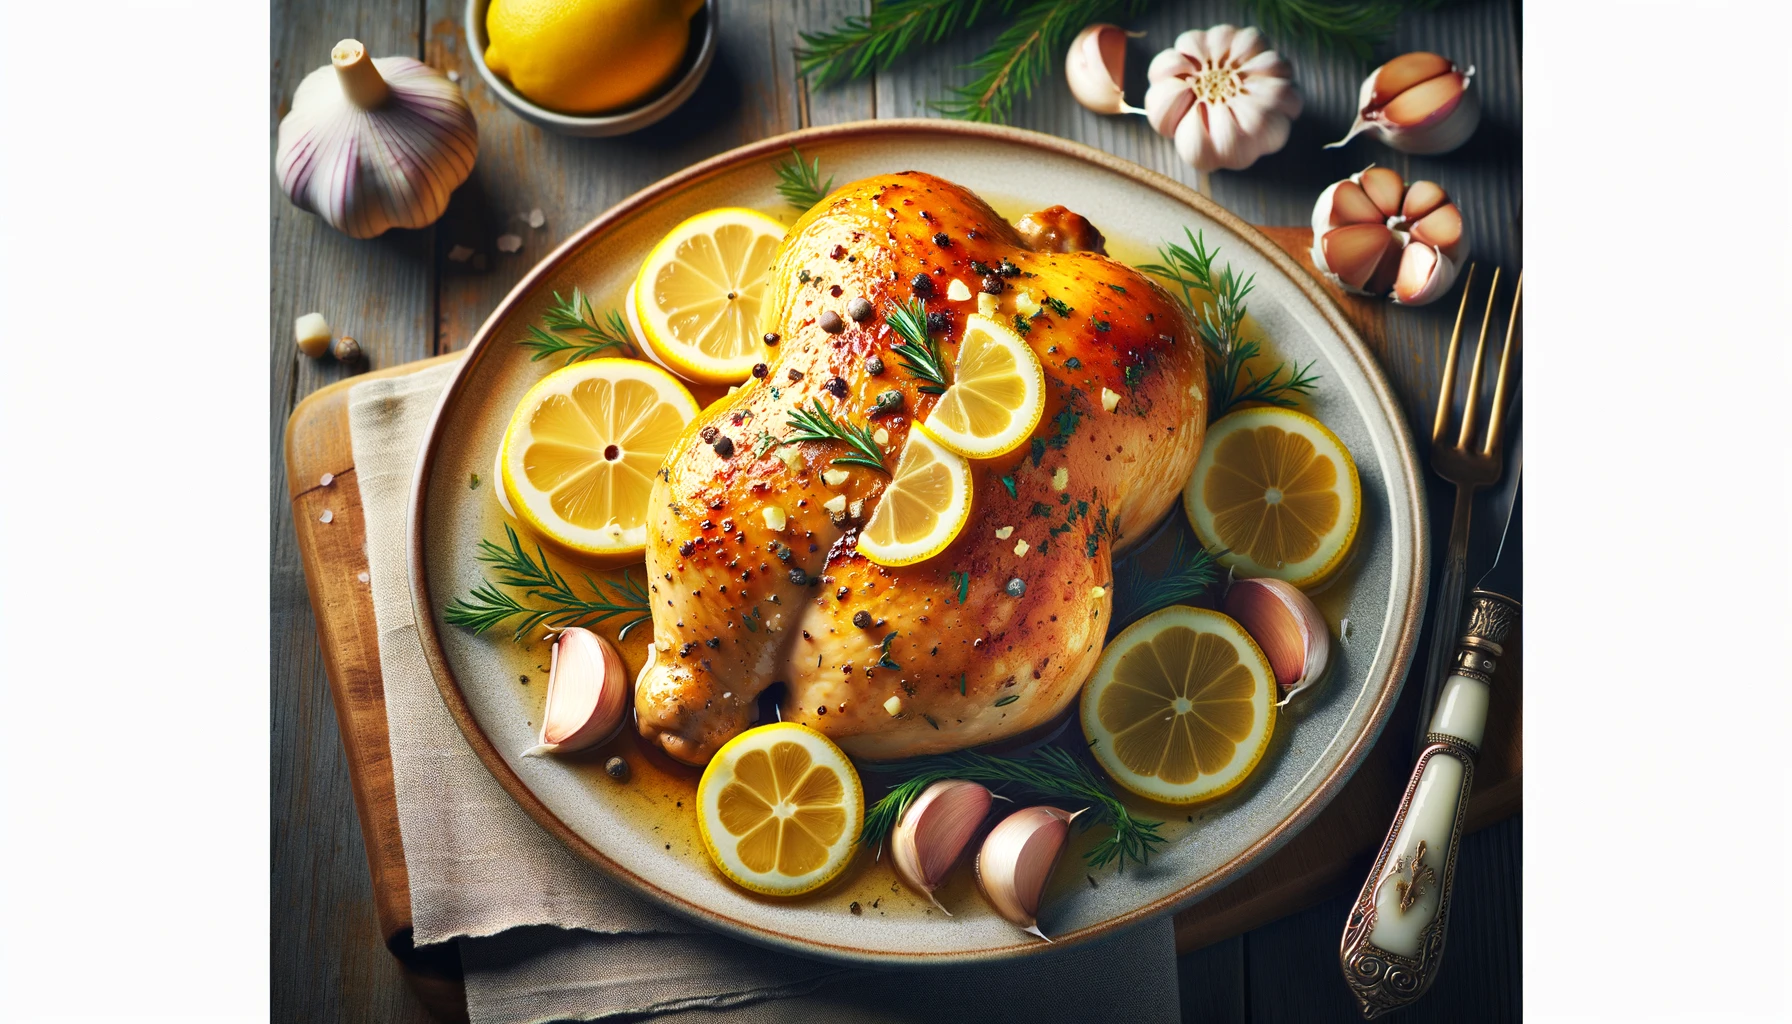 Roasted chicken with lemon and garlic on plate.